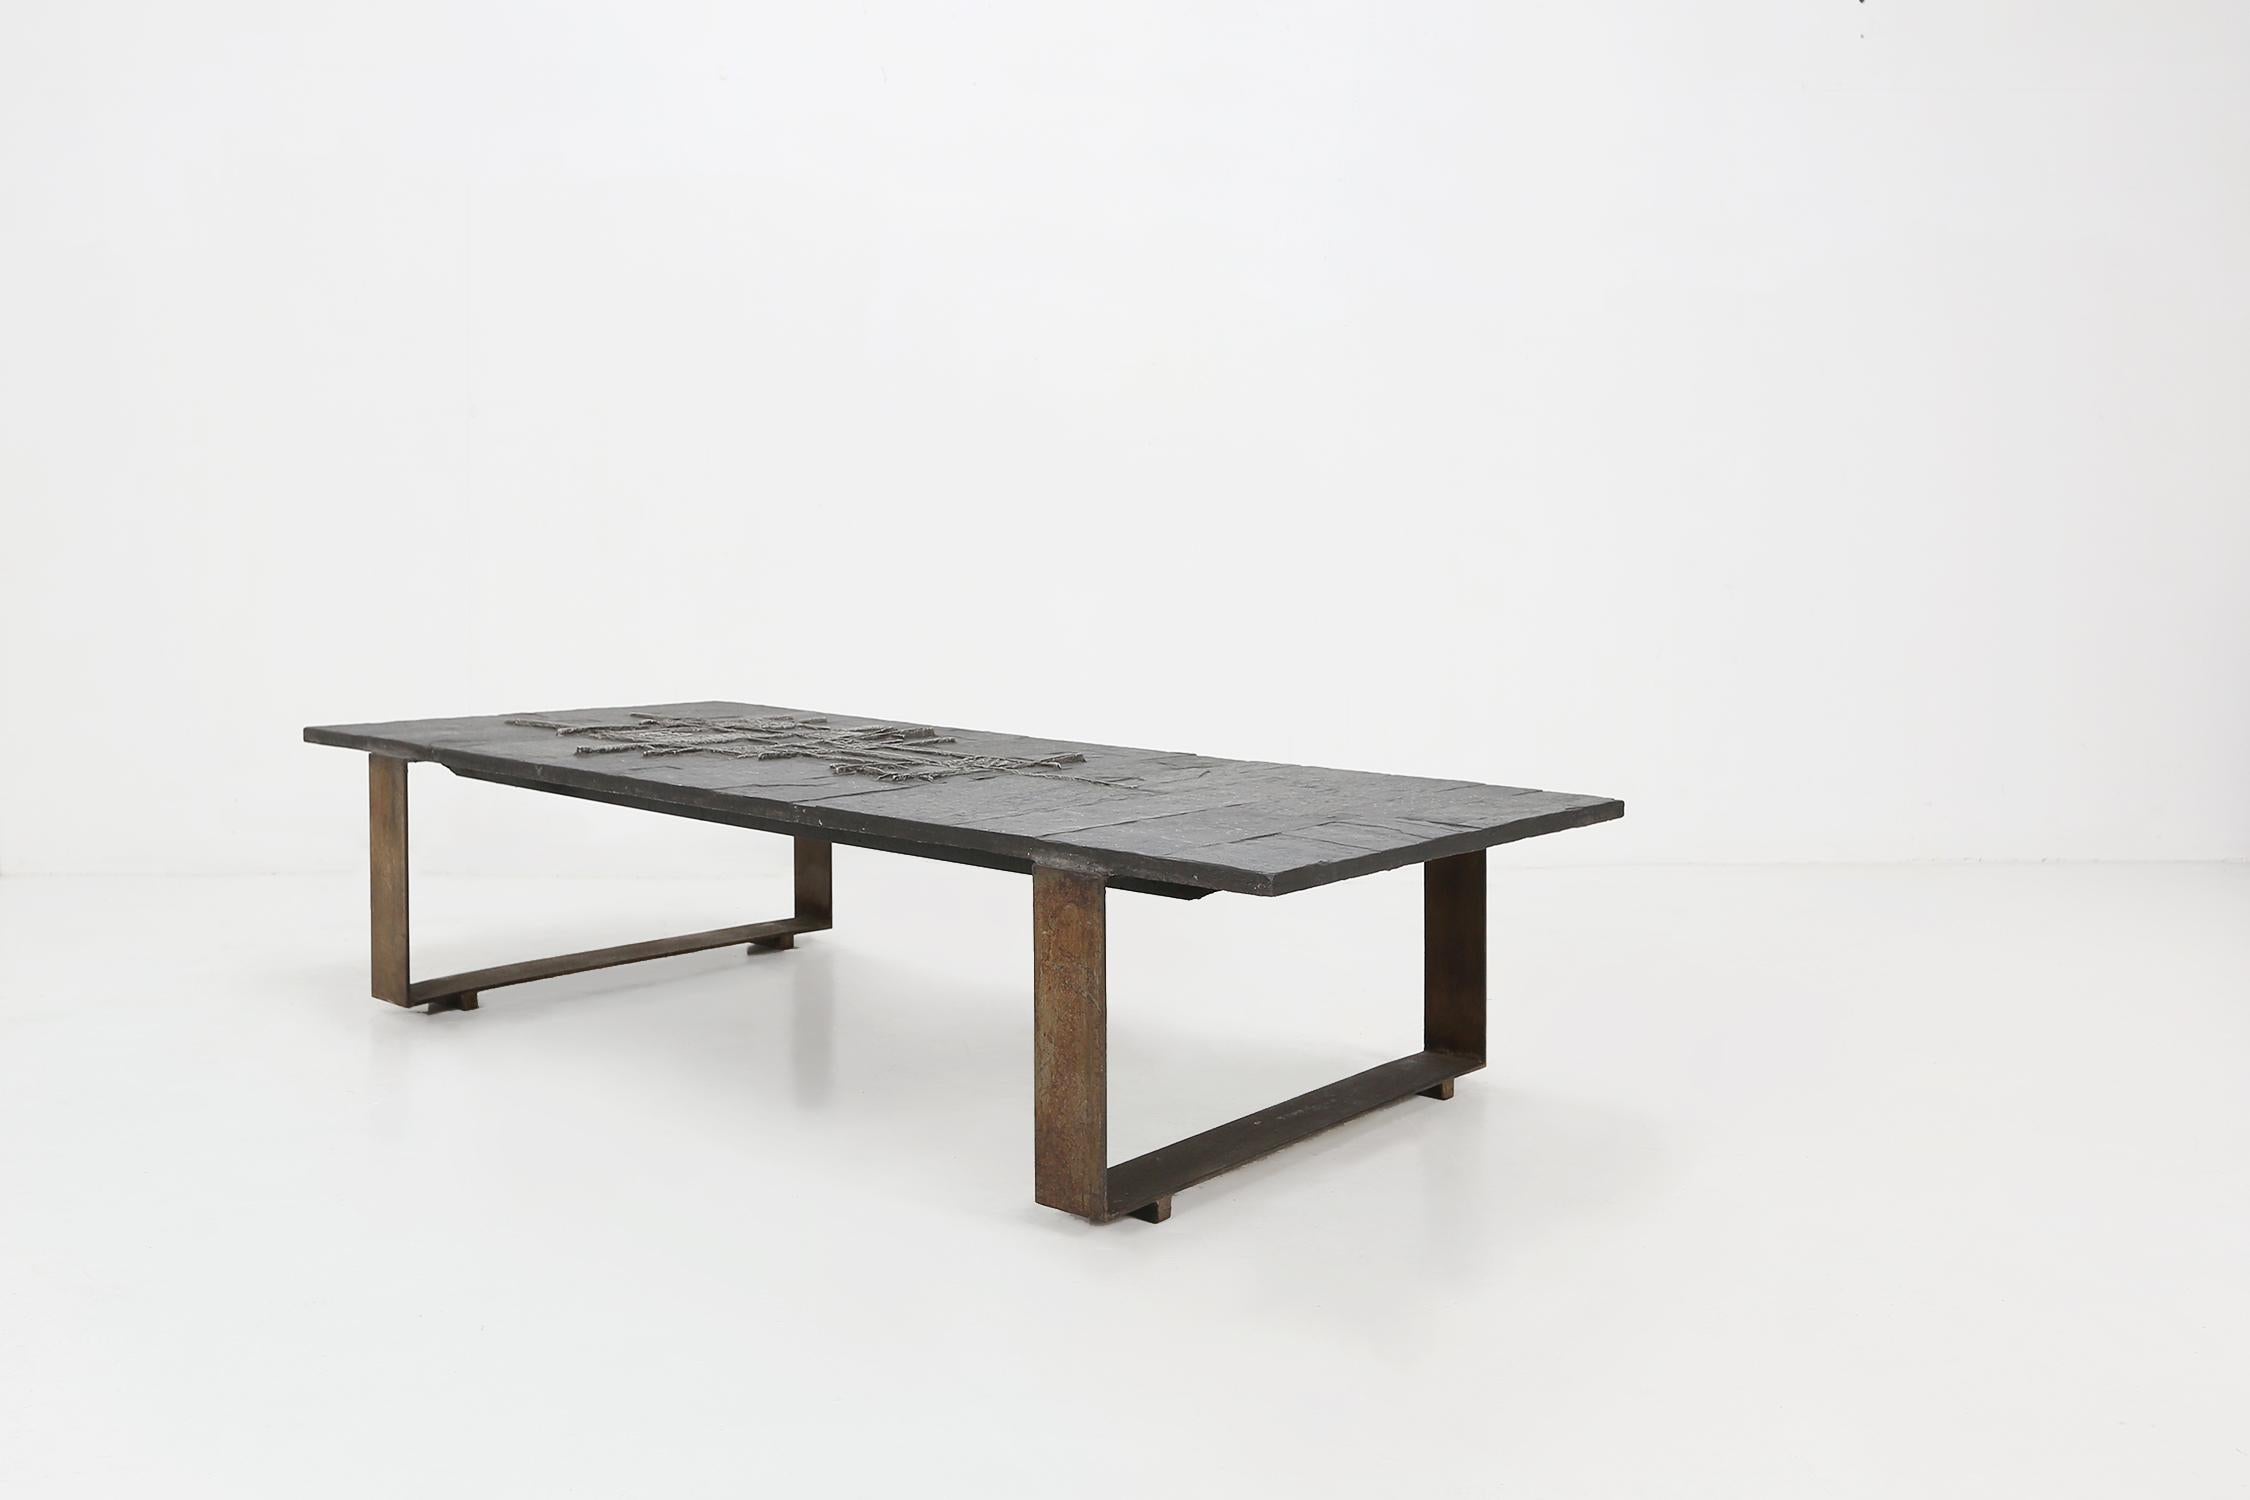 A unique handmade coffee table made by Pia Manu, Belgium, 1960. The table top is made of Brazilian slate stone with a subtle tones of black an grey. In the middle of the top we find a decorative yet abstract sculpture in tin metal. The base is made